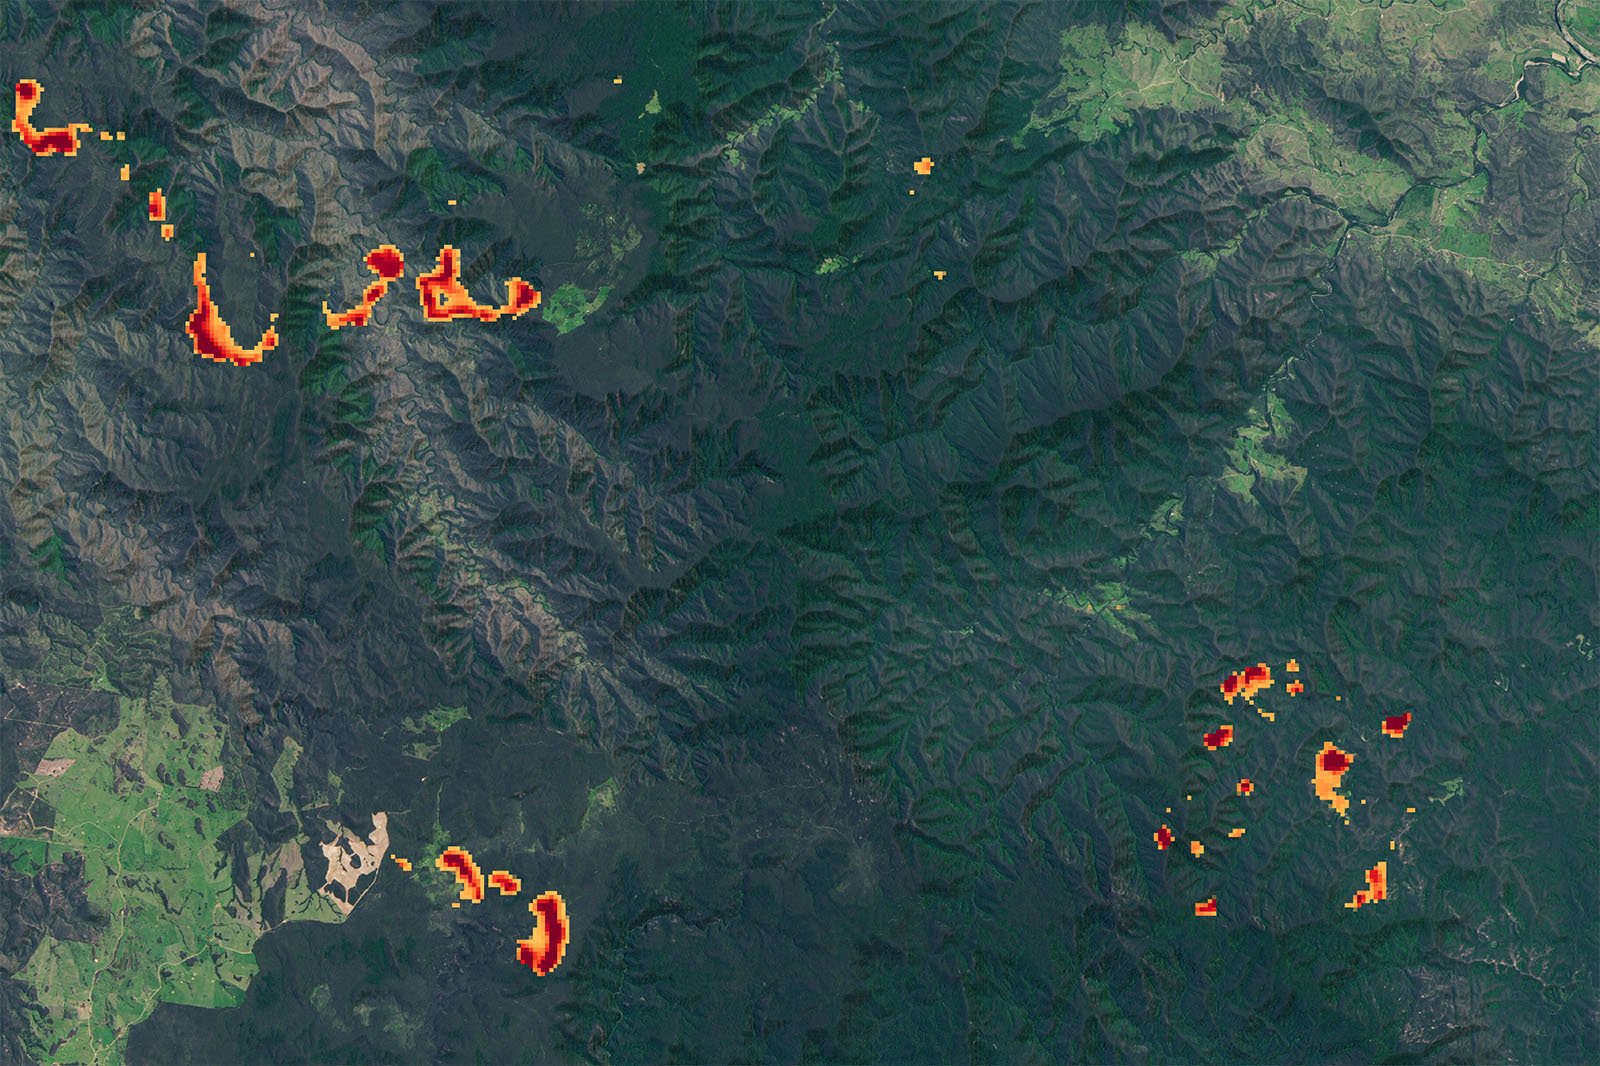 A satellite image showing a mountainous area with wildfires burning. Bright red and yellow areas indicating active fire zones are scattered across the landscape, especially on the left side and bottom right corner, contrasting with the surrounding green terrain.